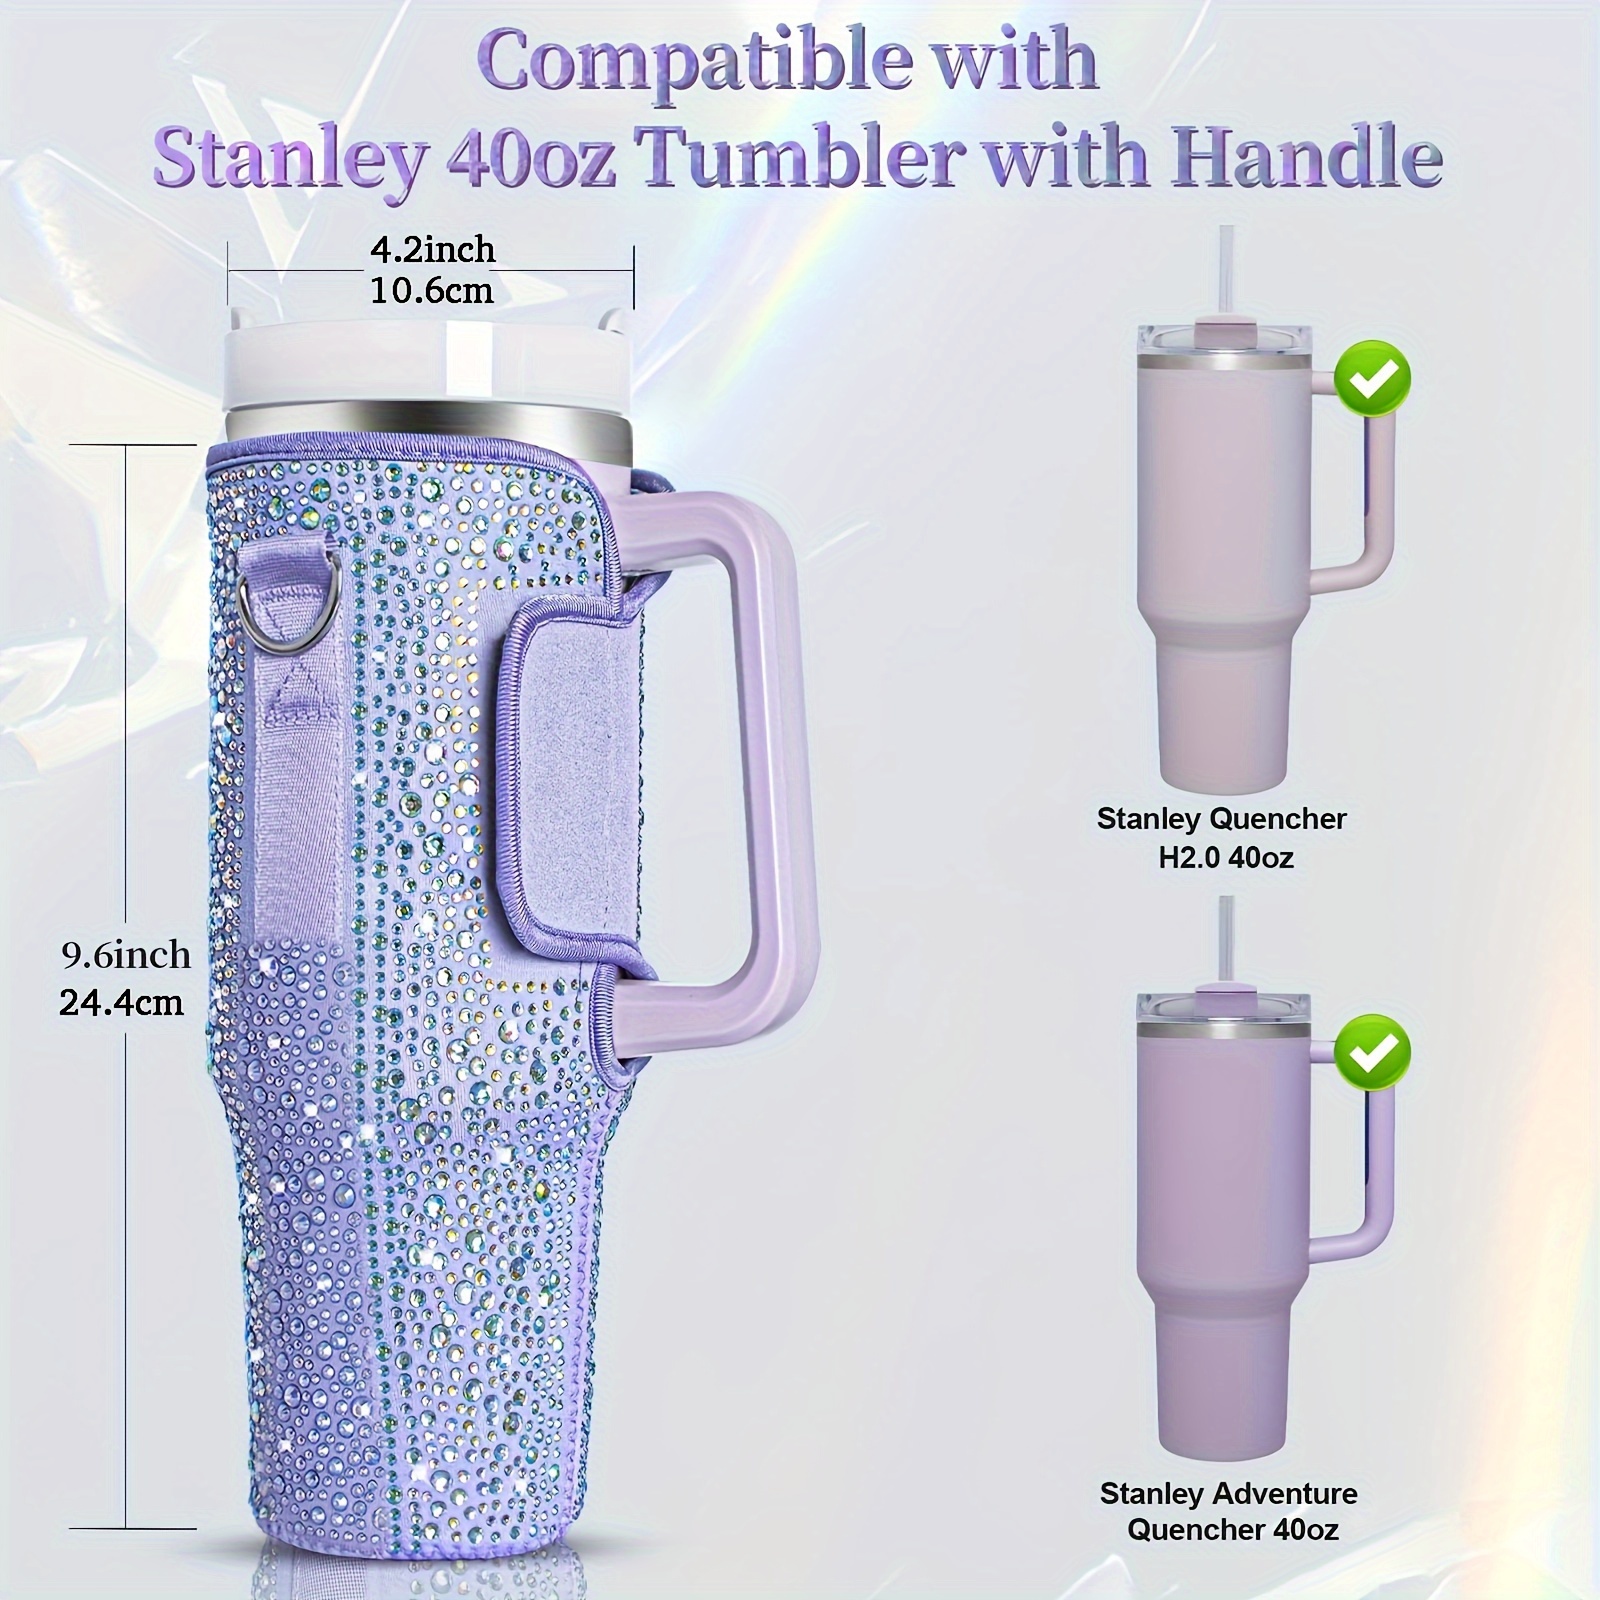  Water Bottle Carrier Bag for Stanley 40oz Tumbler with Handle,Water  Bottle Holder with Adjustable Shoulder Strap,Stanley Cup Accessories for  Hiking Travelling Camping (Gradient Purple) : Sports & Outdoors